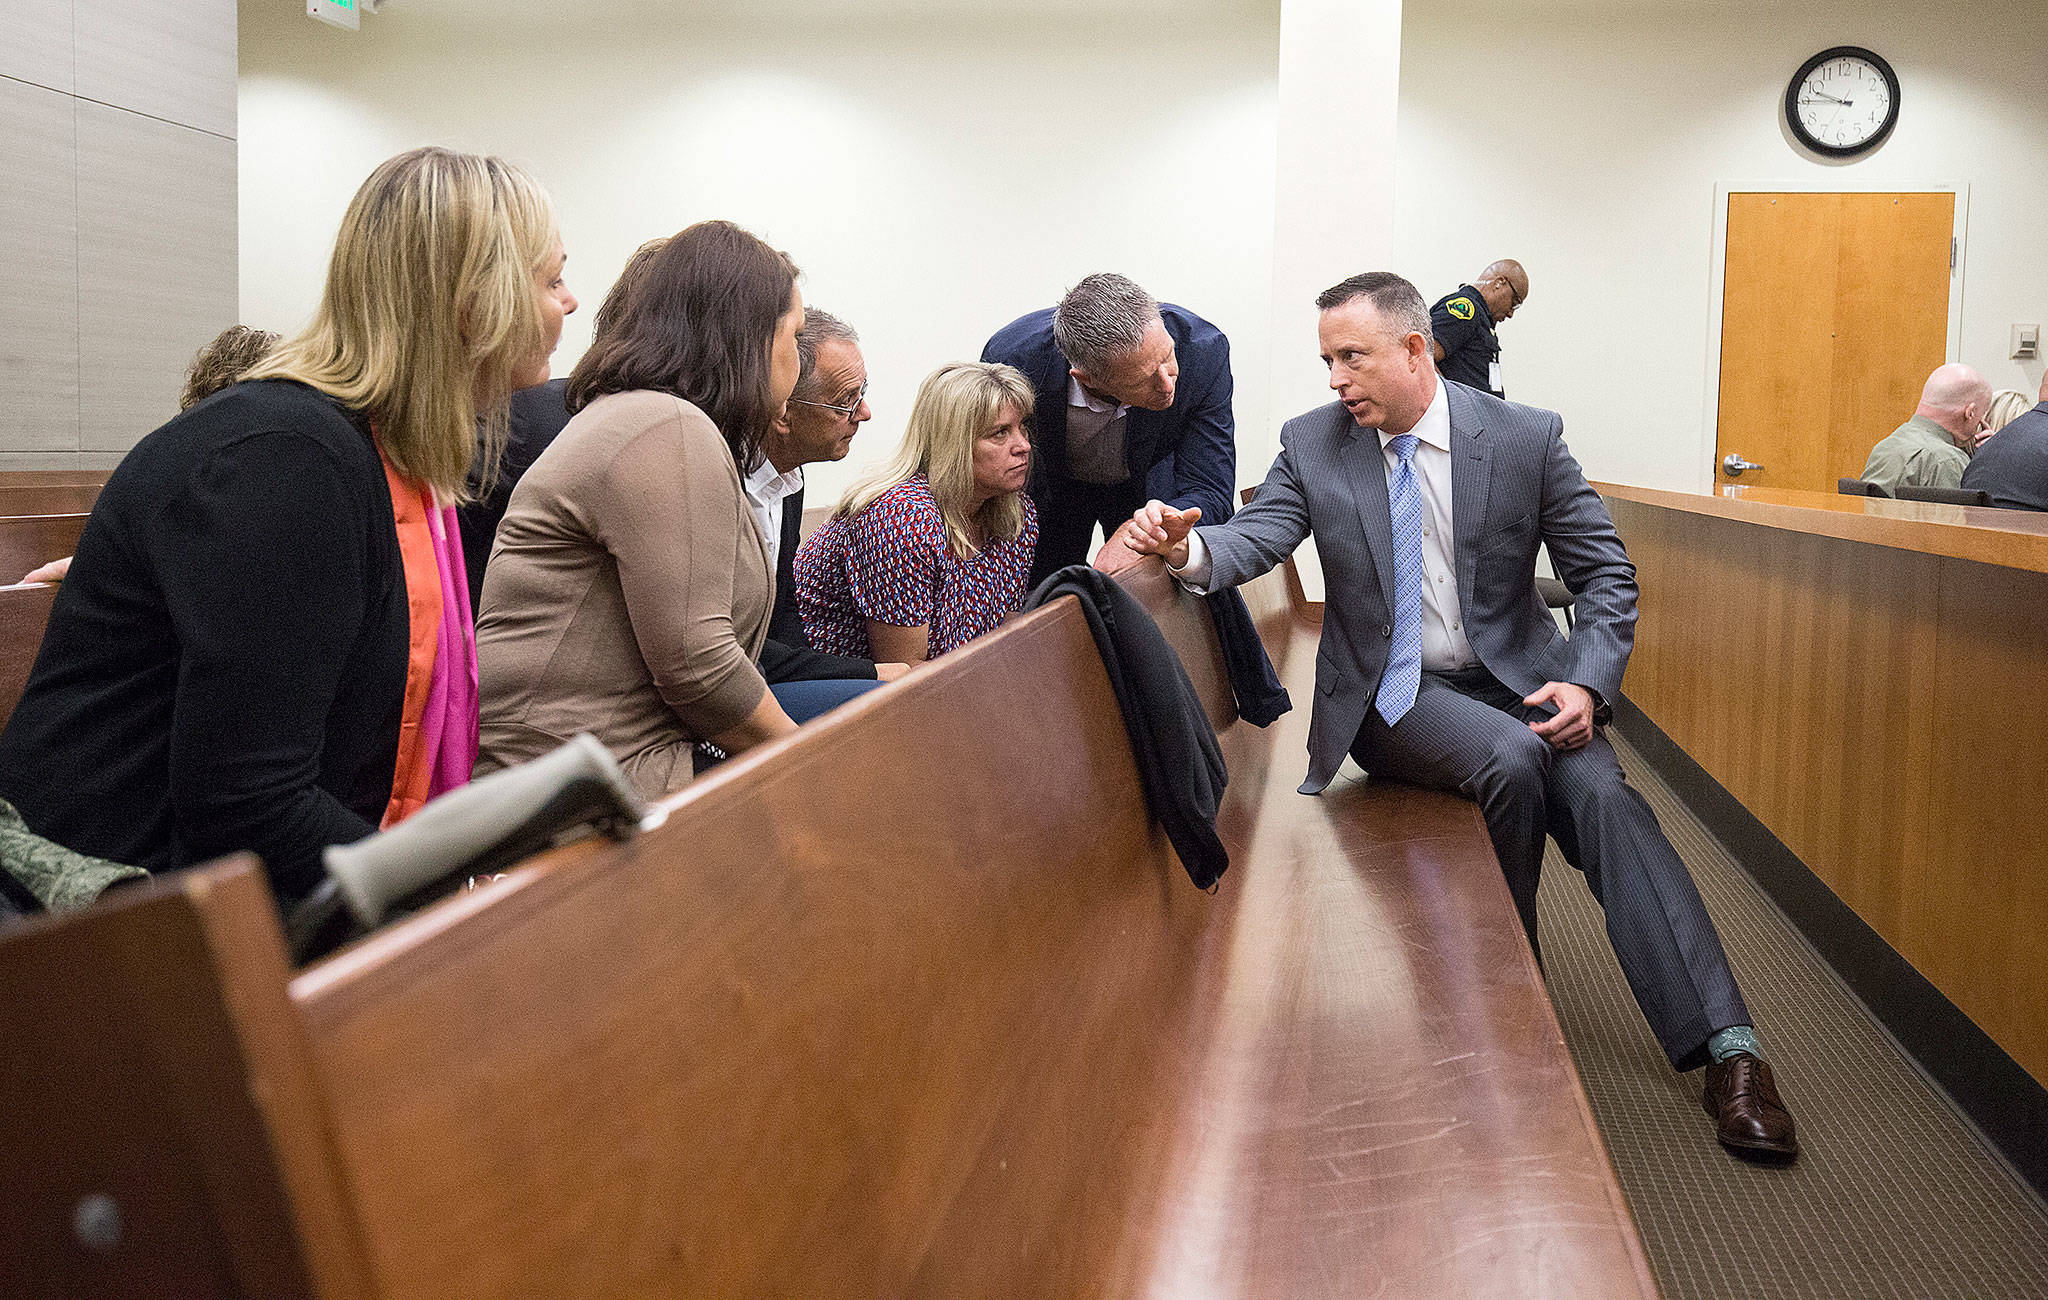 Deputy prosecutor Matthew Baldock (right) talks to victim family members and friends at the trial of William Talbott II at the Snohomish County Courthouse on Friday in Everett. Talbott is on trial for the 1987 murders of Tanya Van Cuylenborg and Jay Cook. (Andy Bronson / The Herald/POOL)